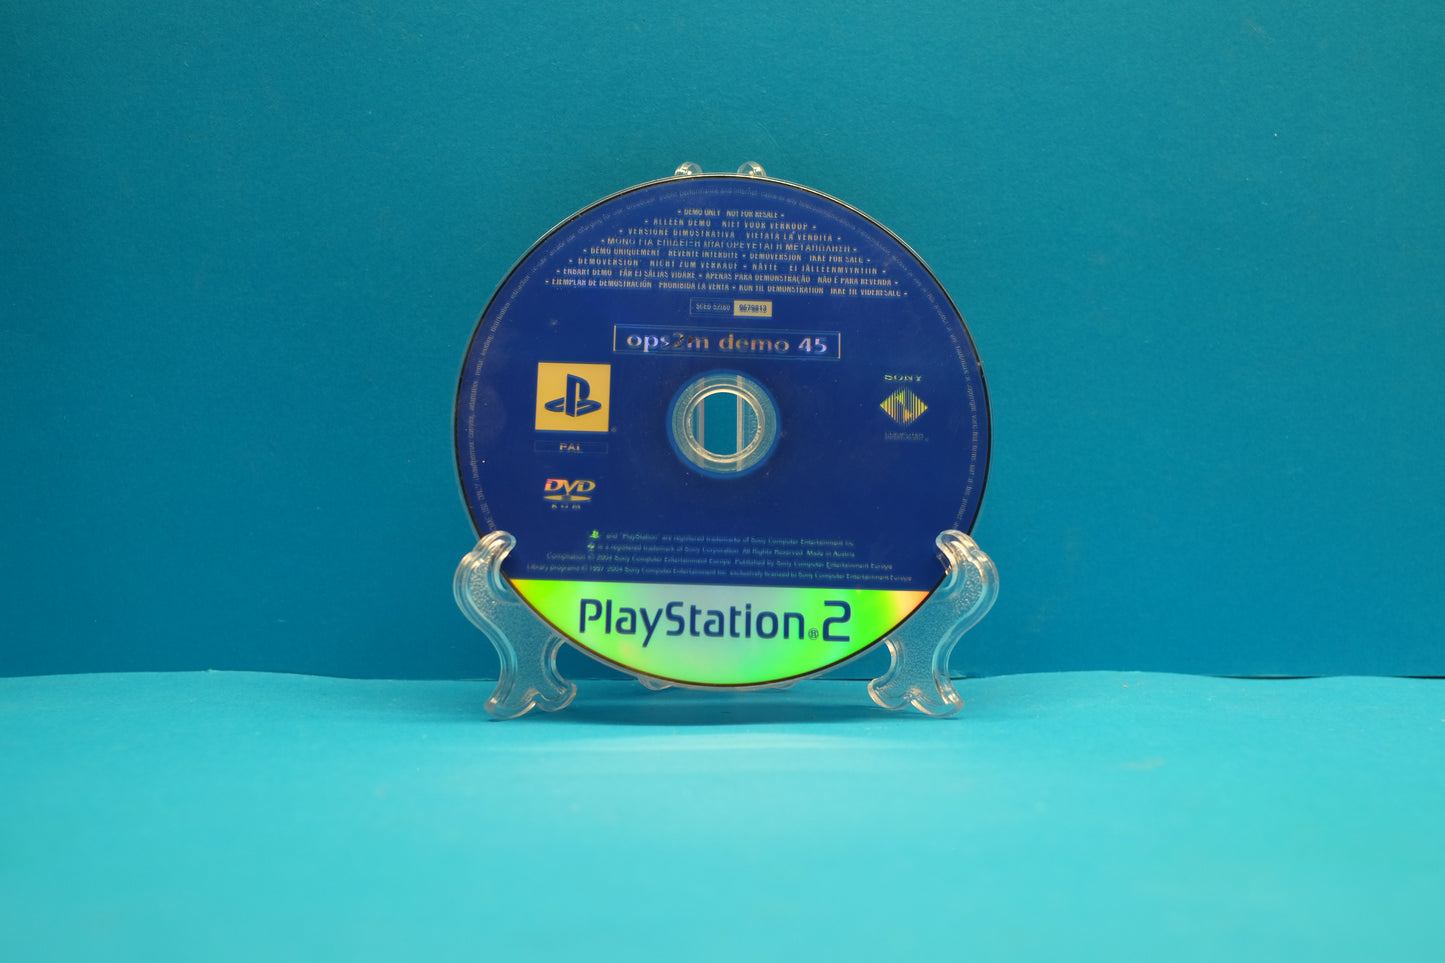 Official PlayStation 2 Magazine Demo 45 *Disc Only* - Playstation 2